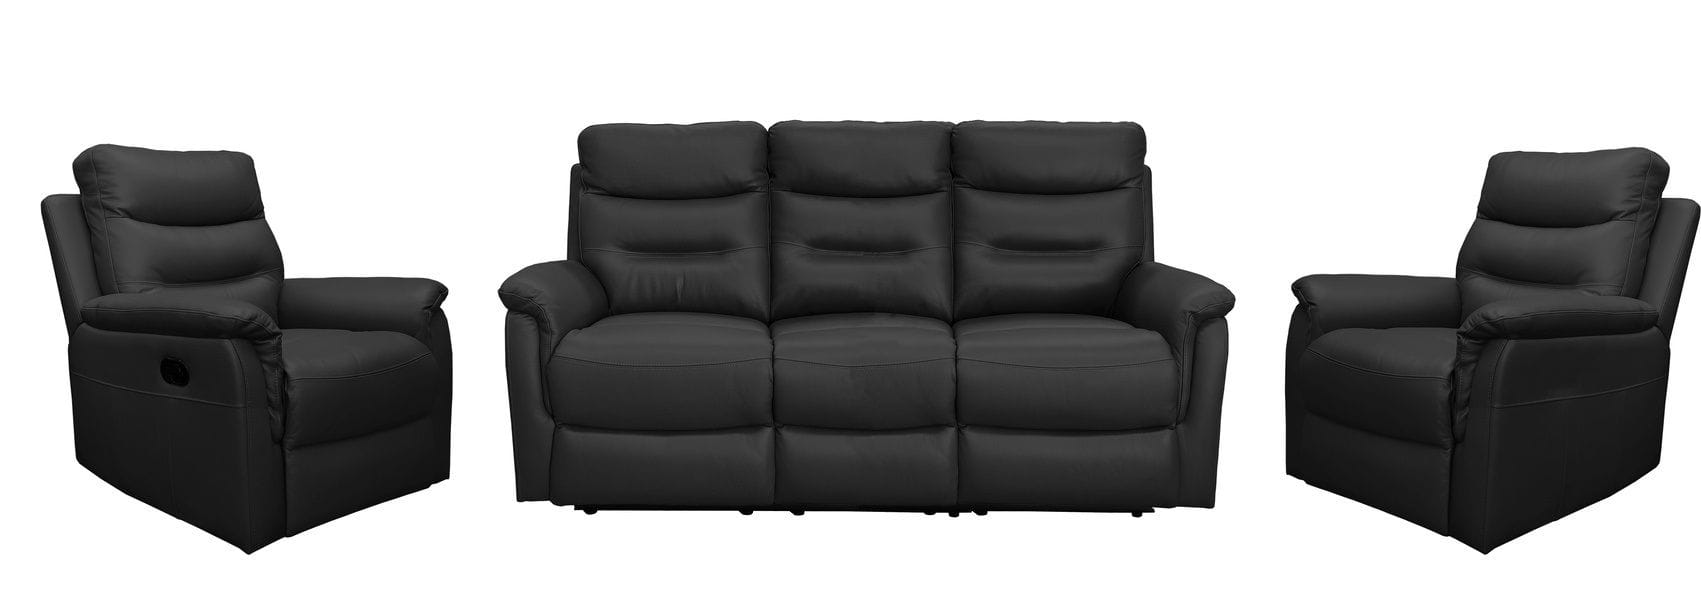 Milano 3 Seater Leather Reclining Lounge Suite Related